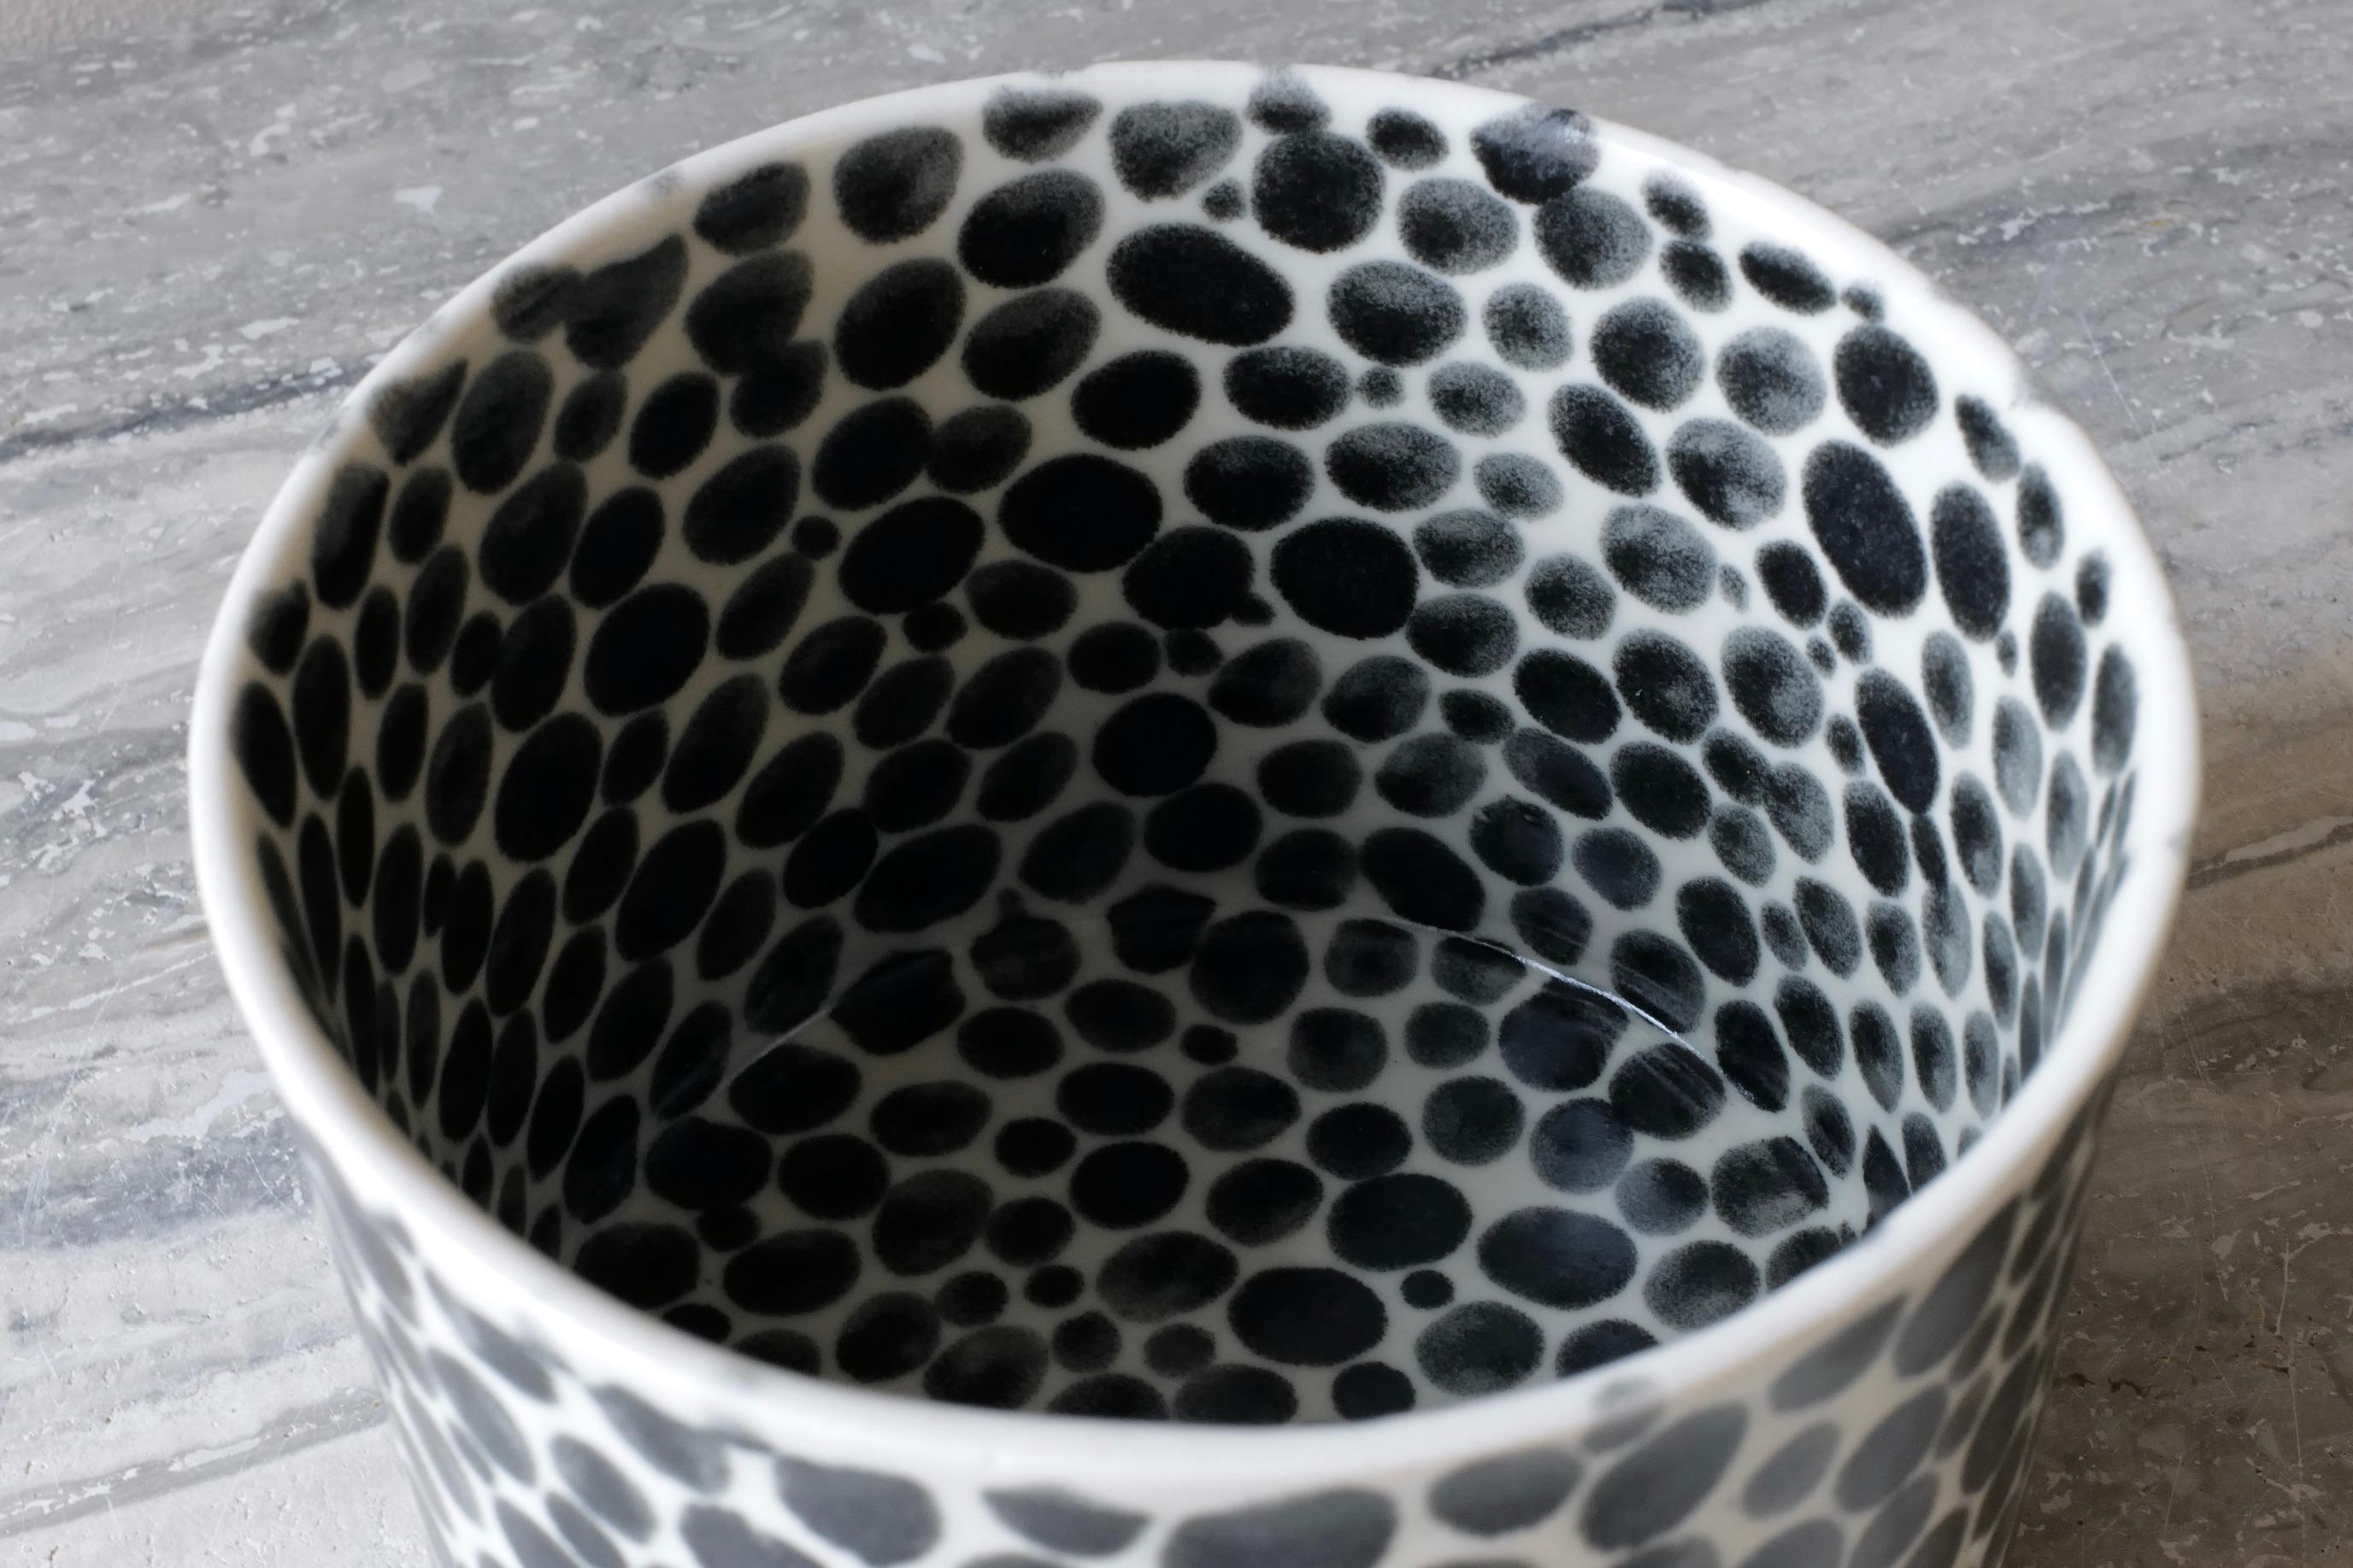 Black Dots Short Porcelain Vase by Lana Kova In New Condition For Sale In New York City, NY